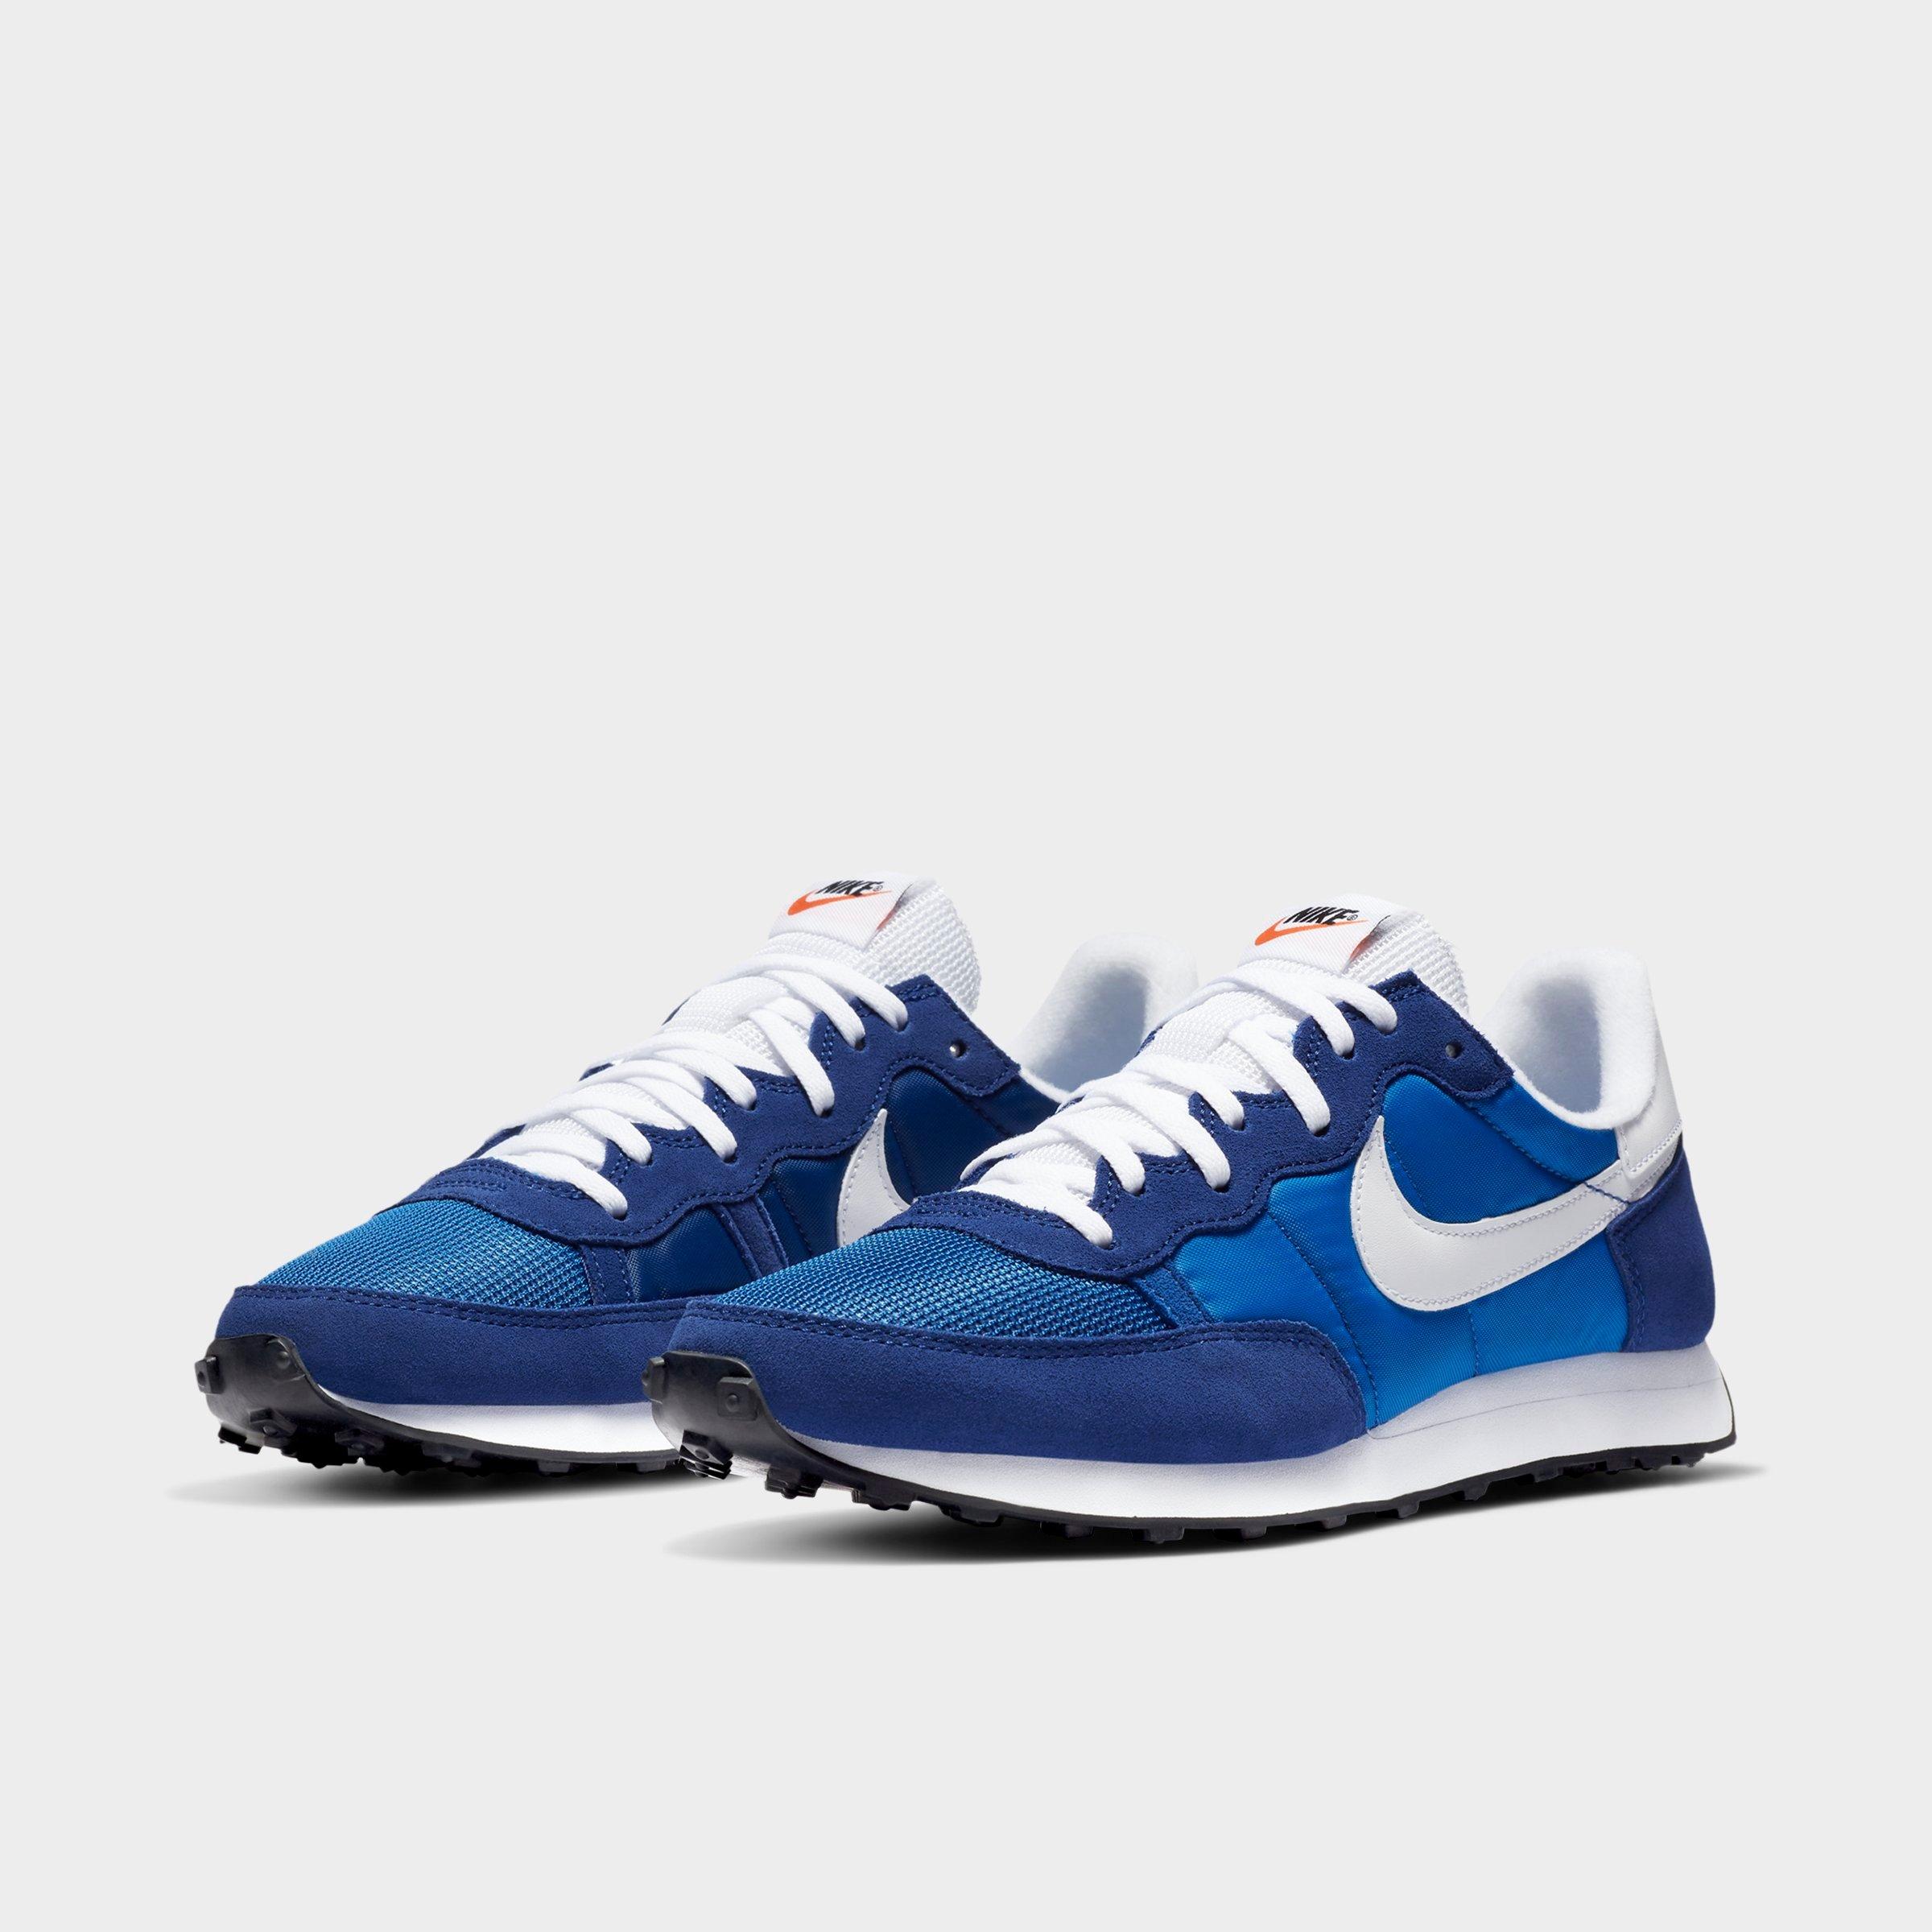 nike blue casual shoes